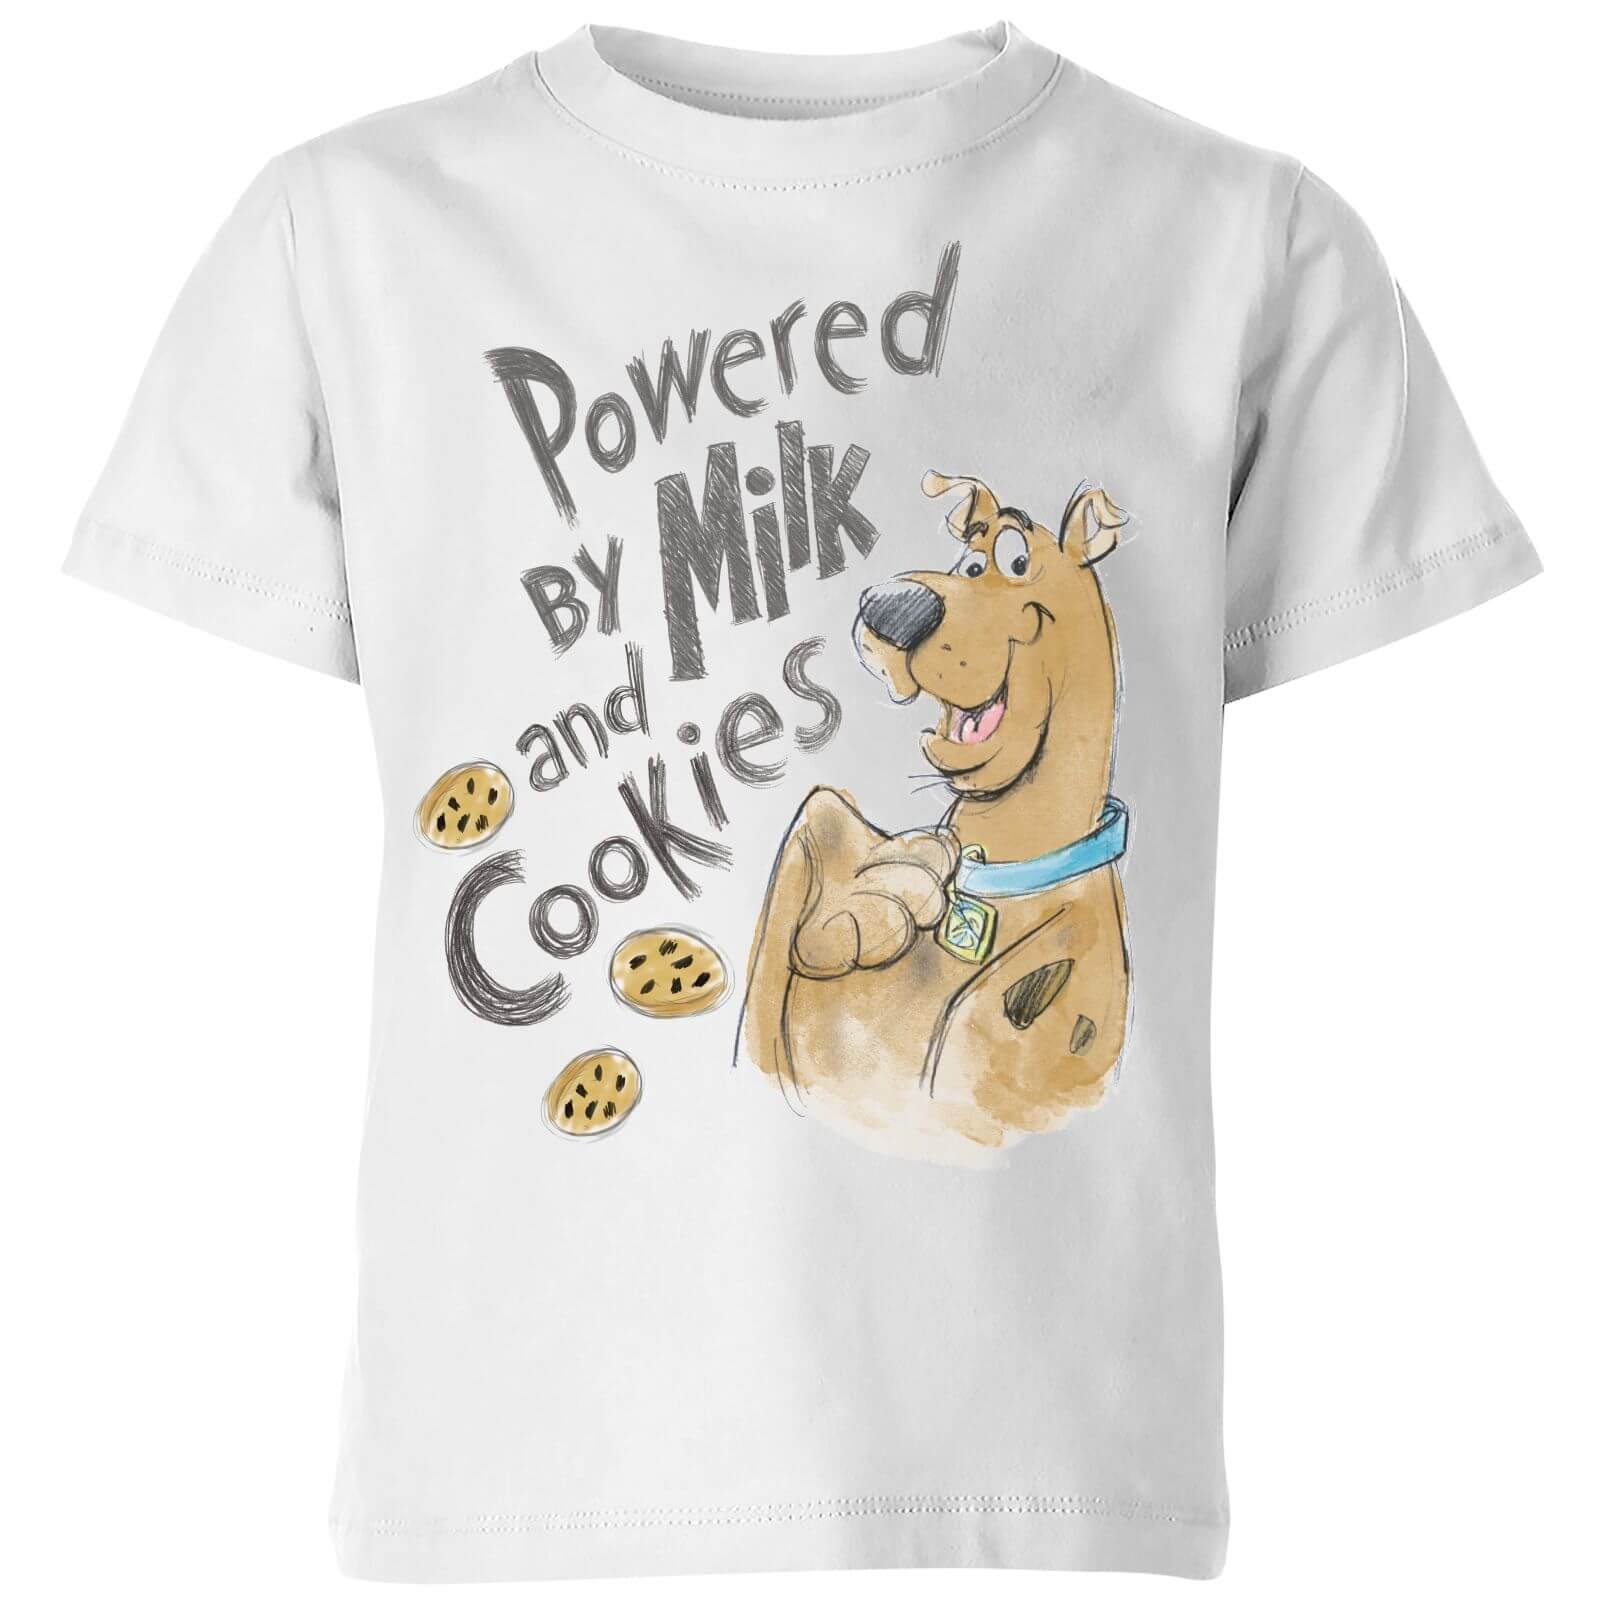 Scooby Doo Powered By Milk And Cookies Kids' T-Shirt - White - 9-10 Years